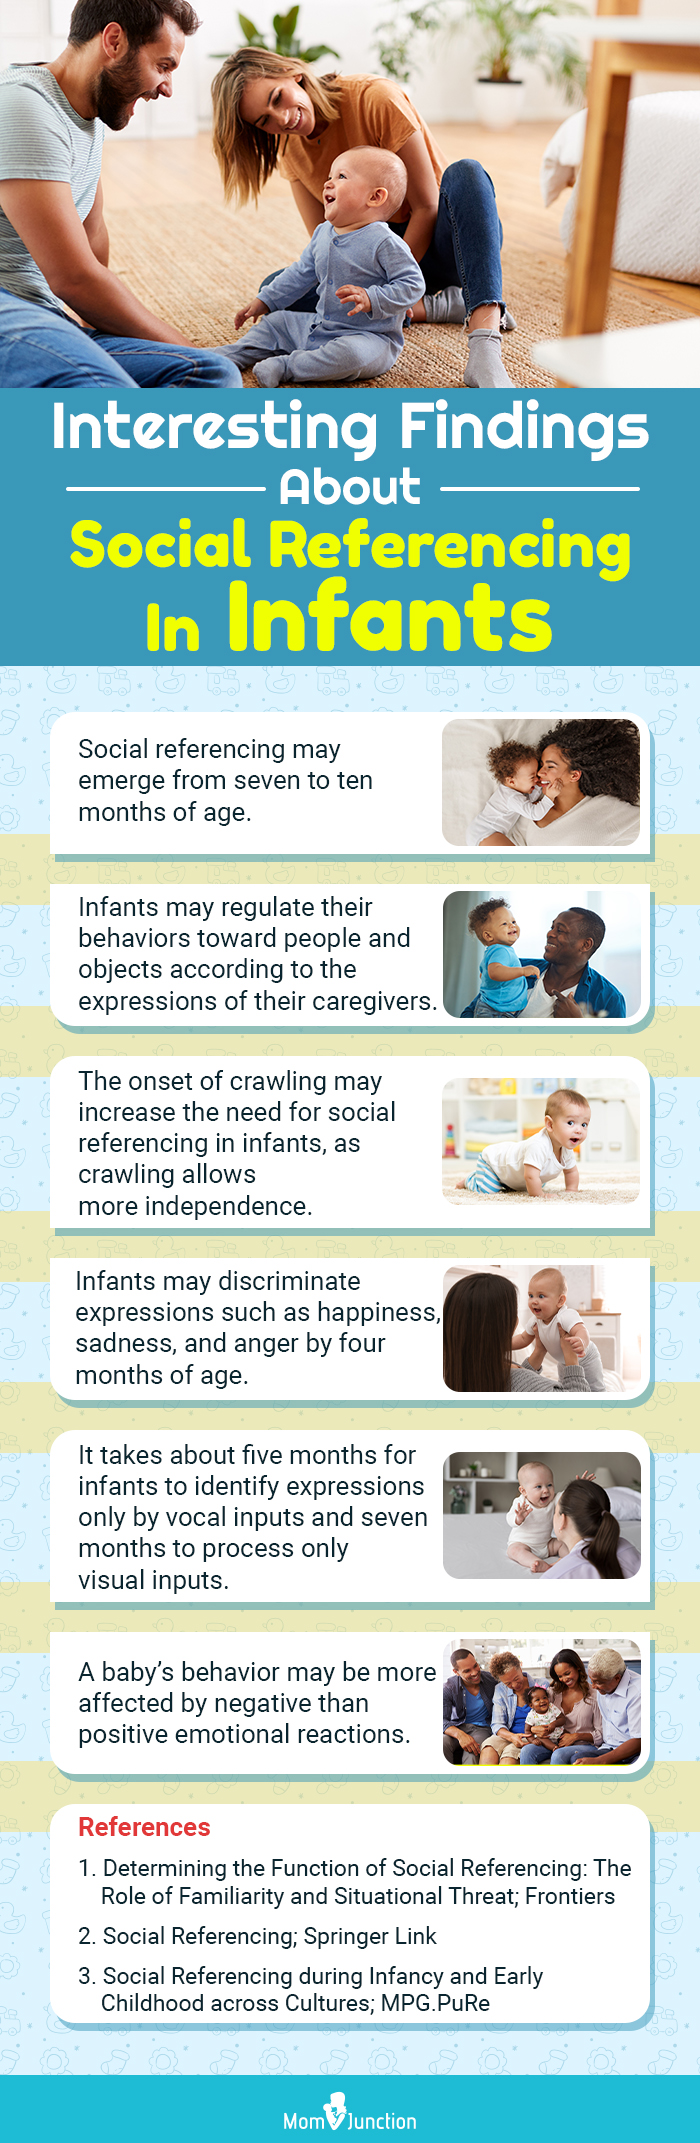 interesting findings about social referencing in infants (infographic)